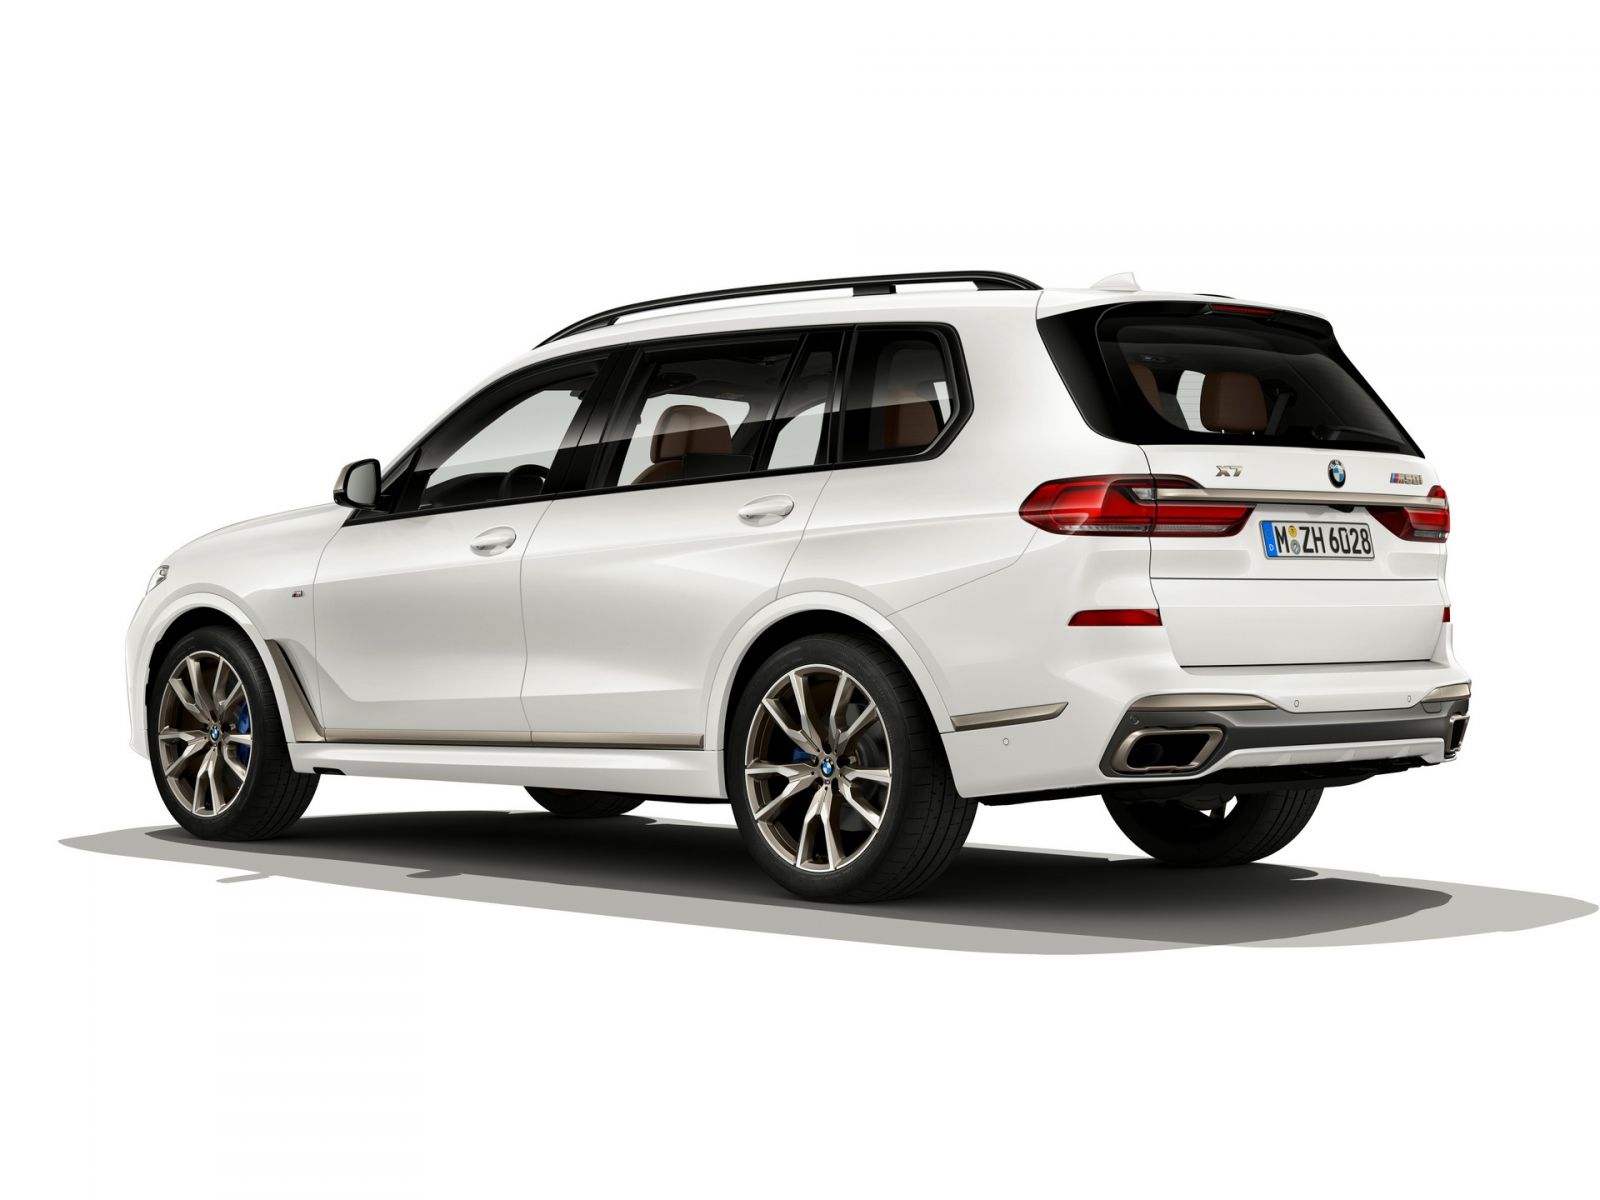 BMW X5 and X7 M50i